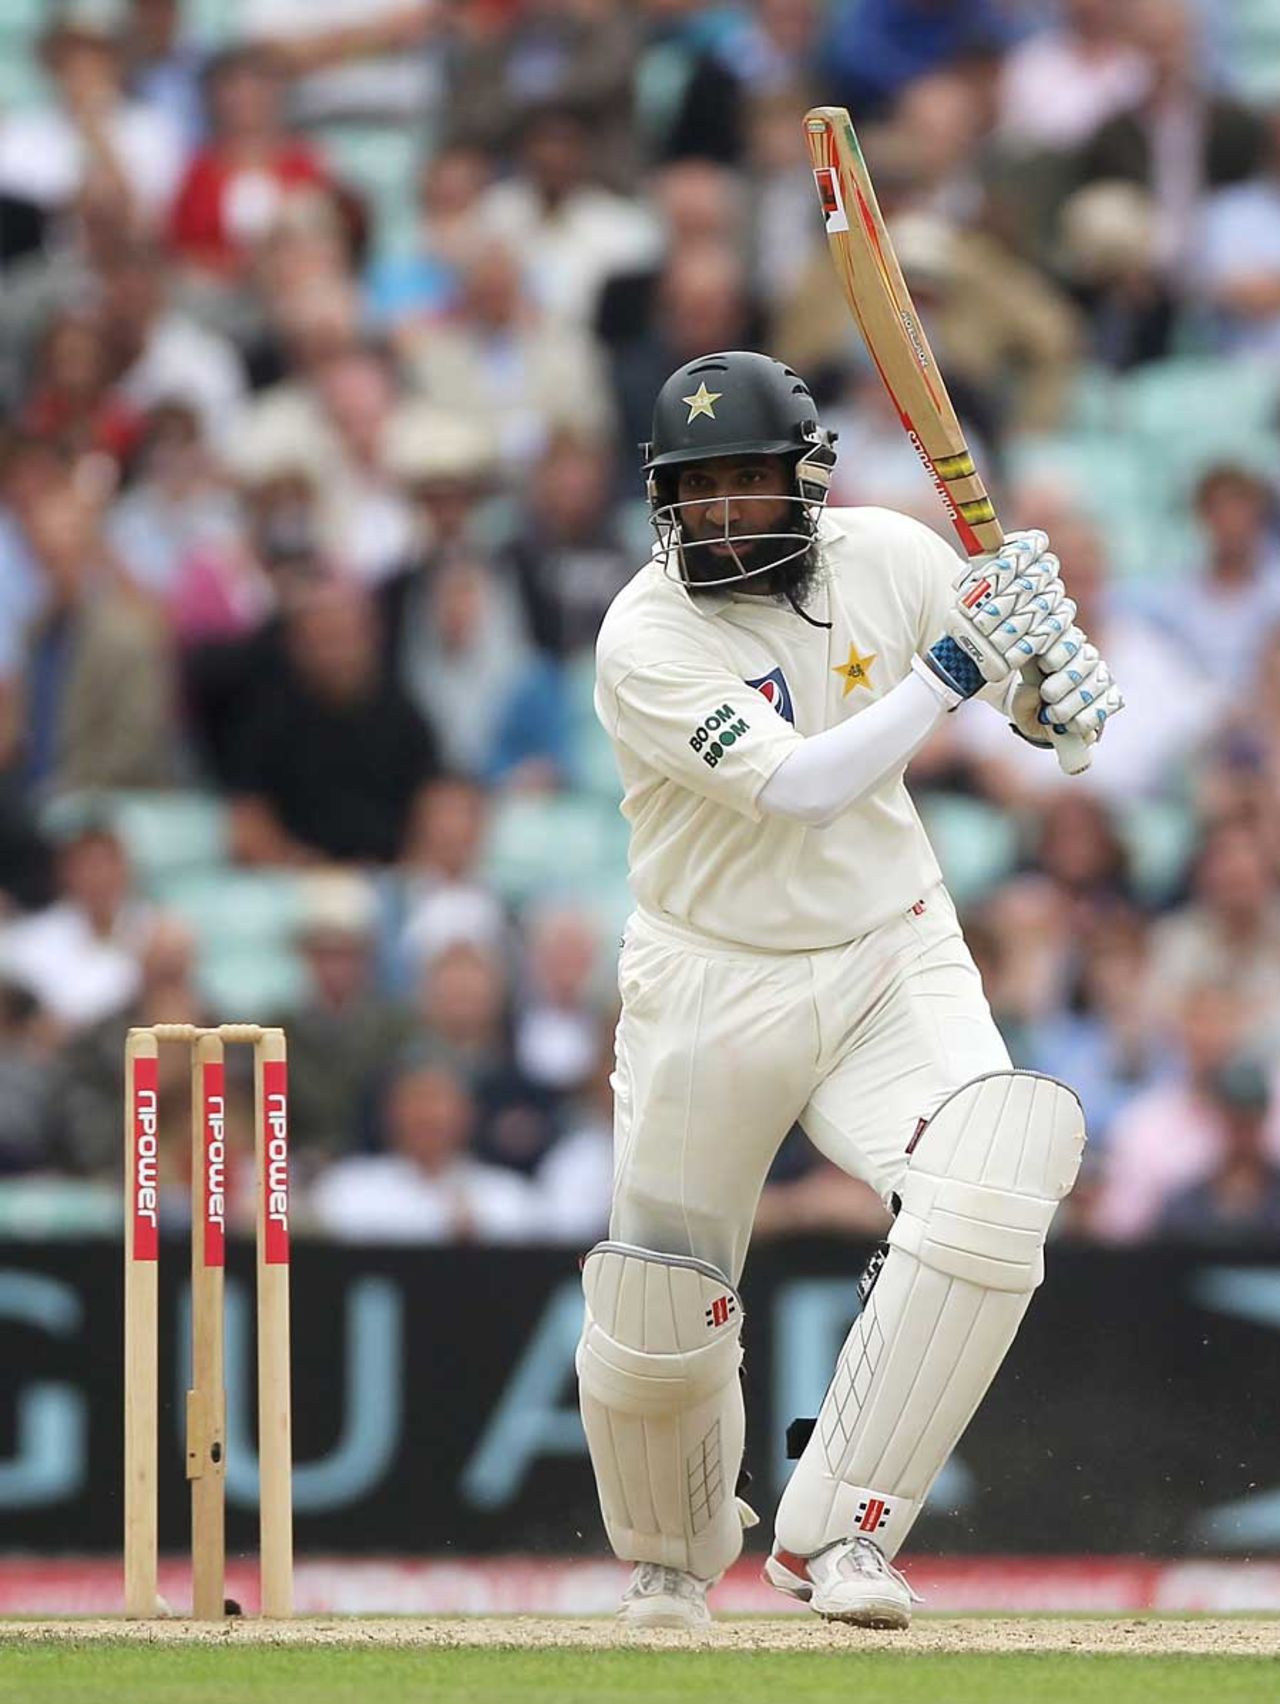 Mohammad Yousuf brought experience and calmness to Pakistan's middle order, England v Pakistan, 3rd Test, The Oval, August 19, 2010